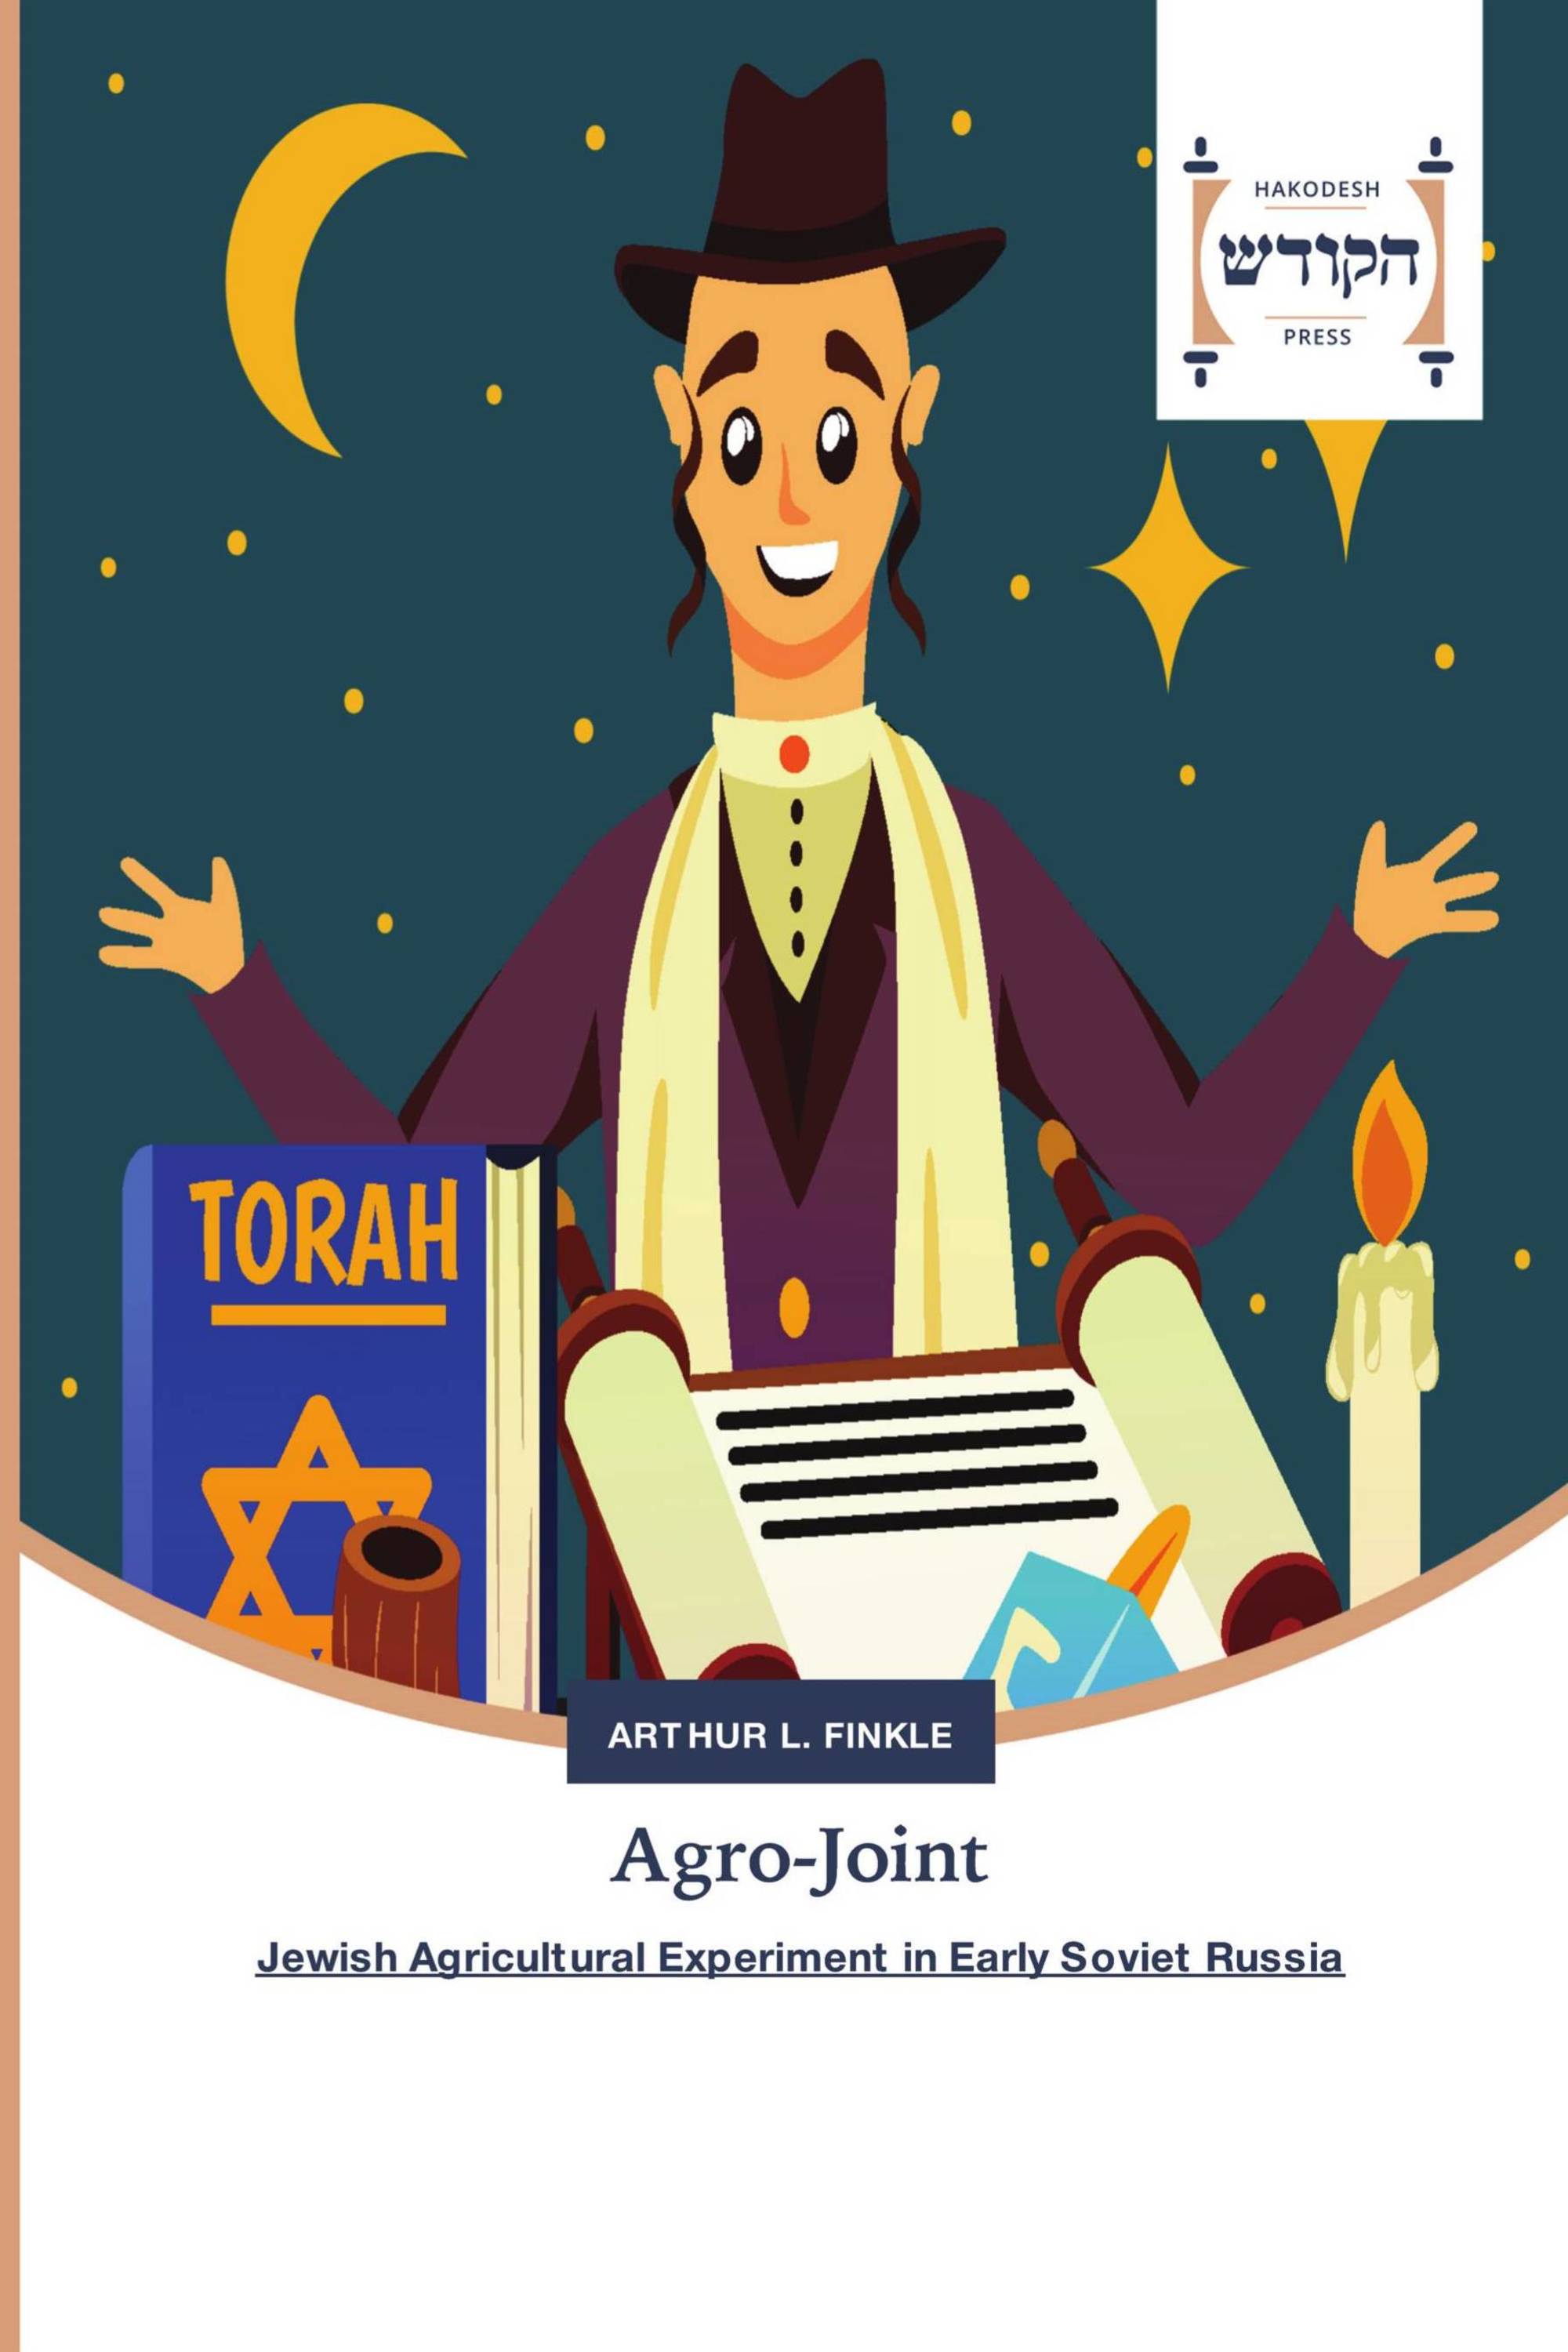 Agro-Joint